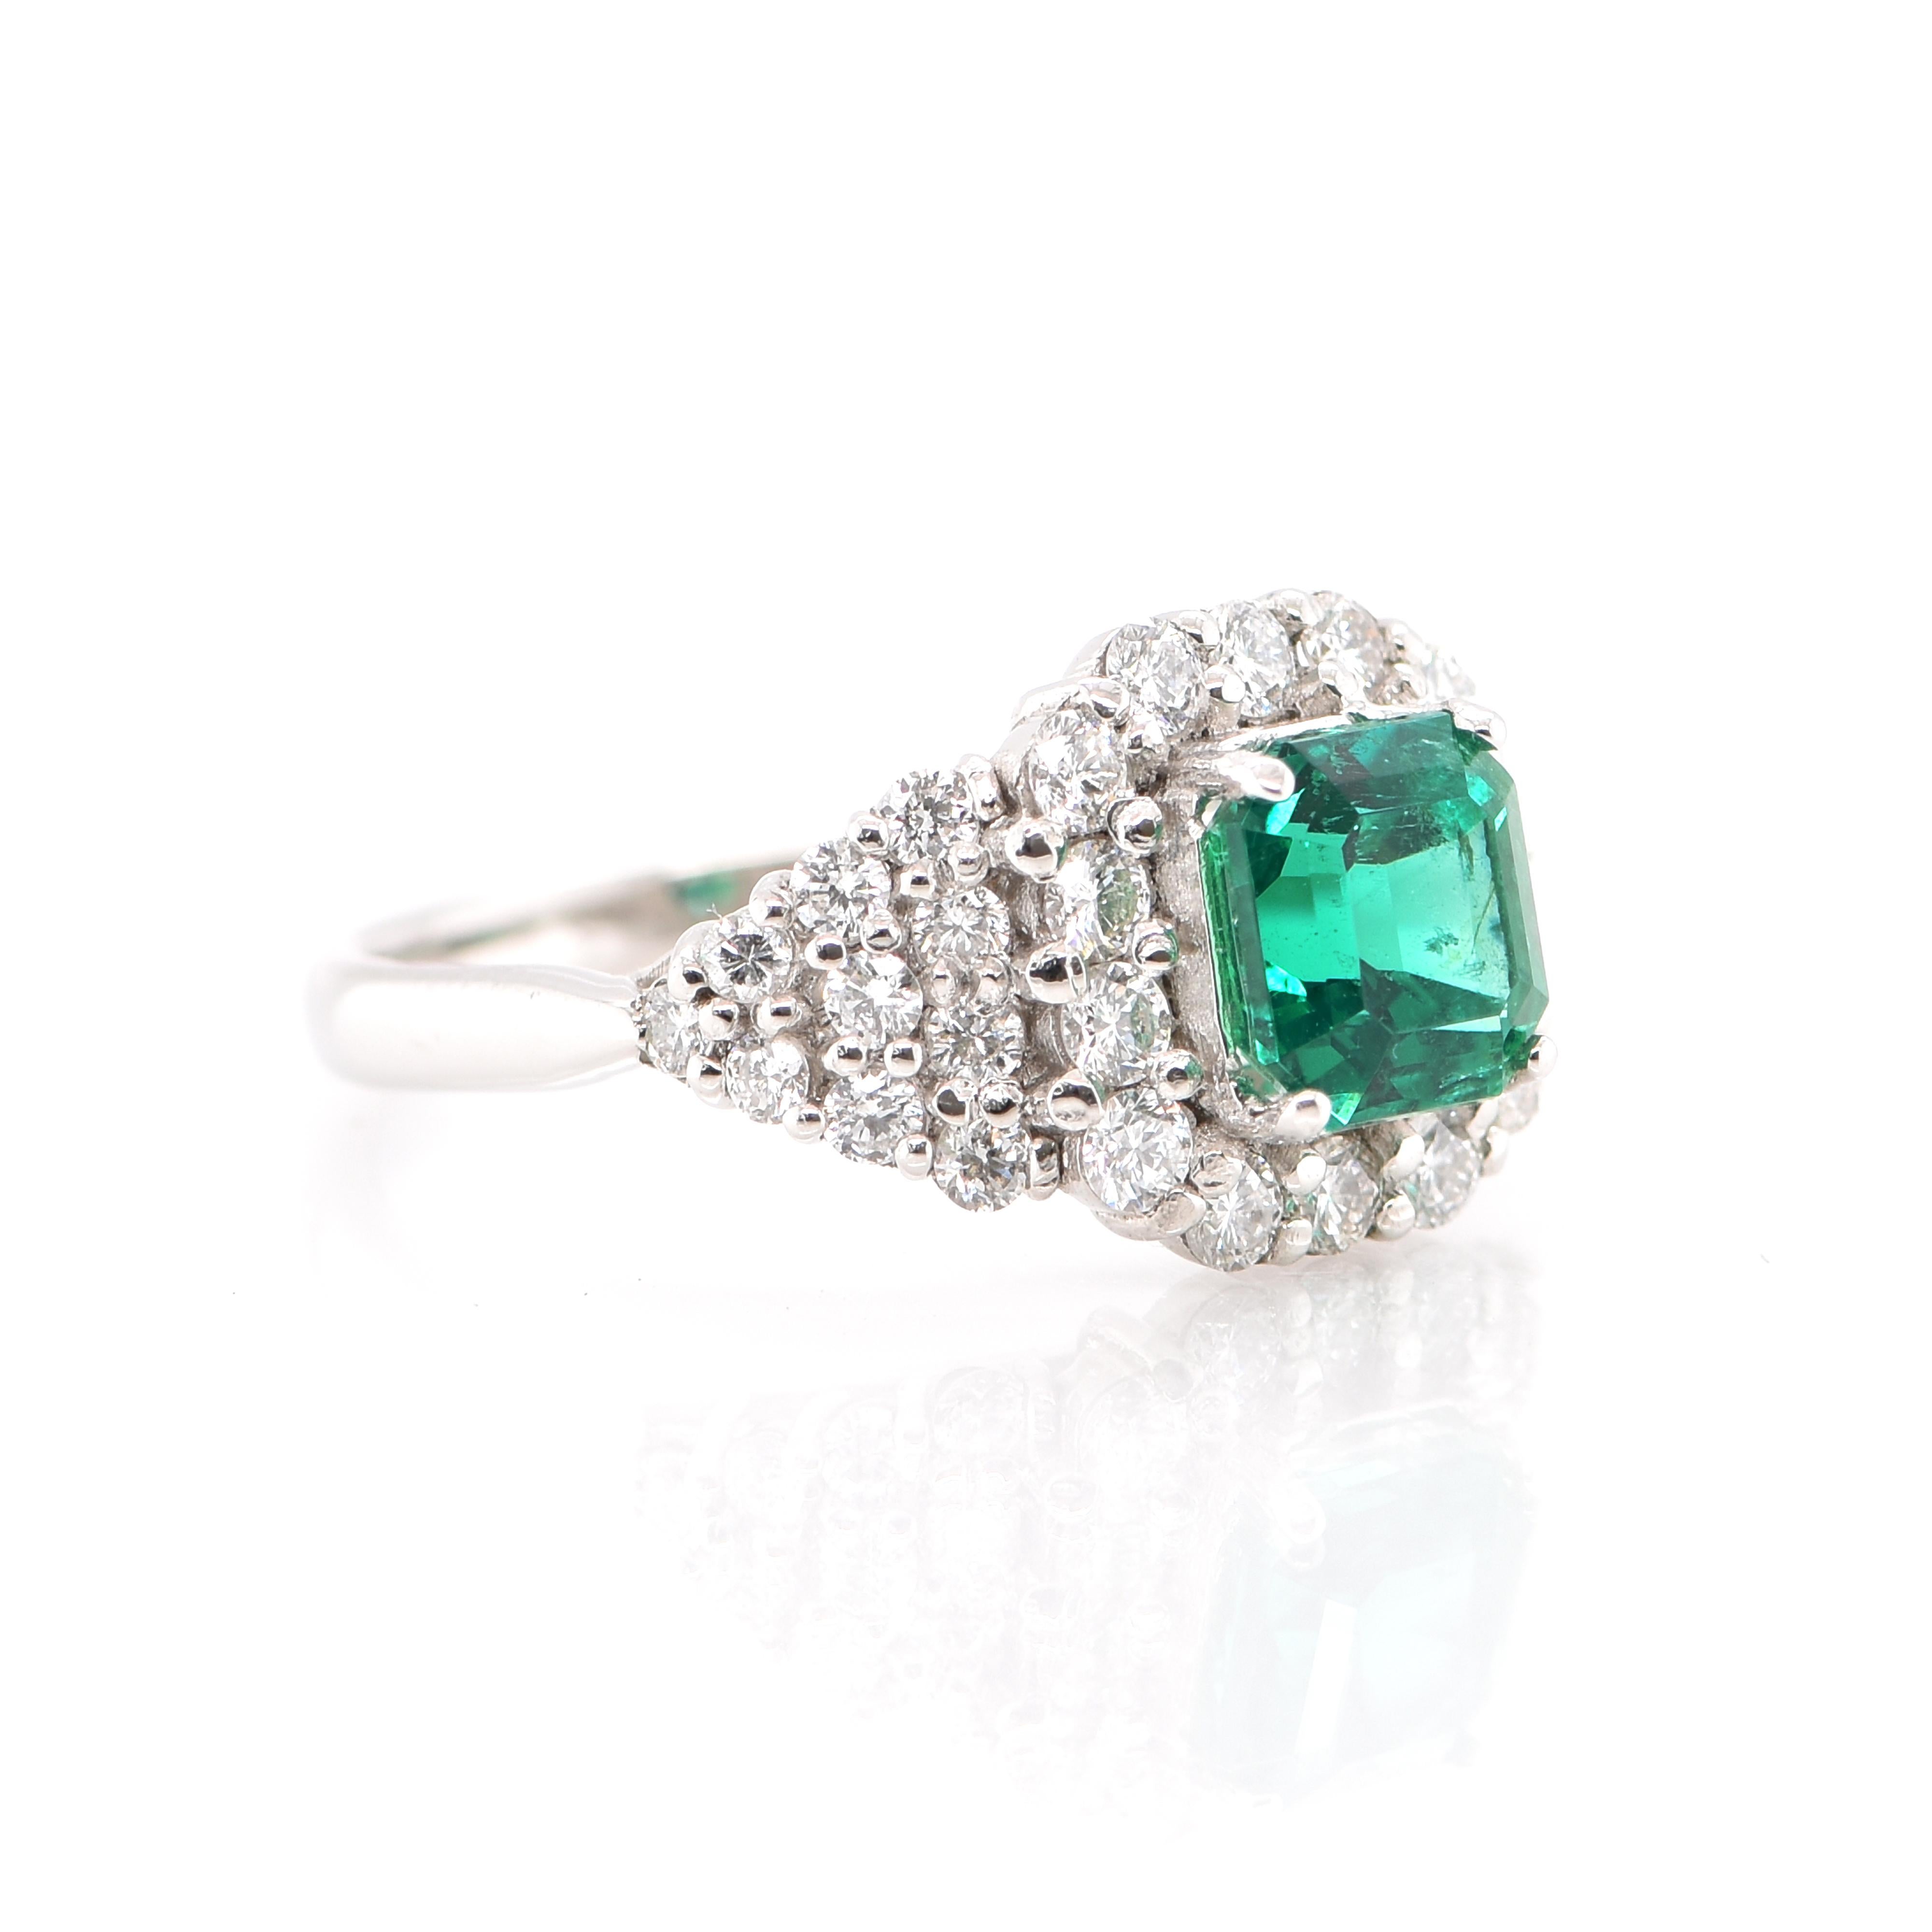 Modern GIA Certified 1.39 Carat Natural Colombian Emerald Ring Set in Platinum